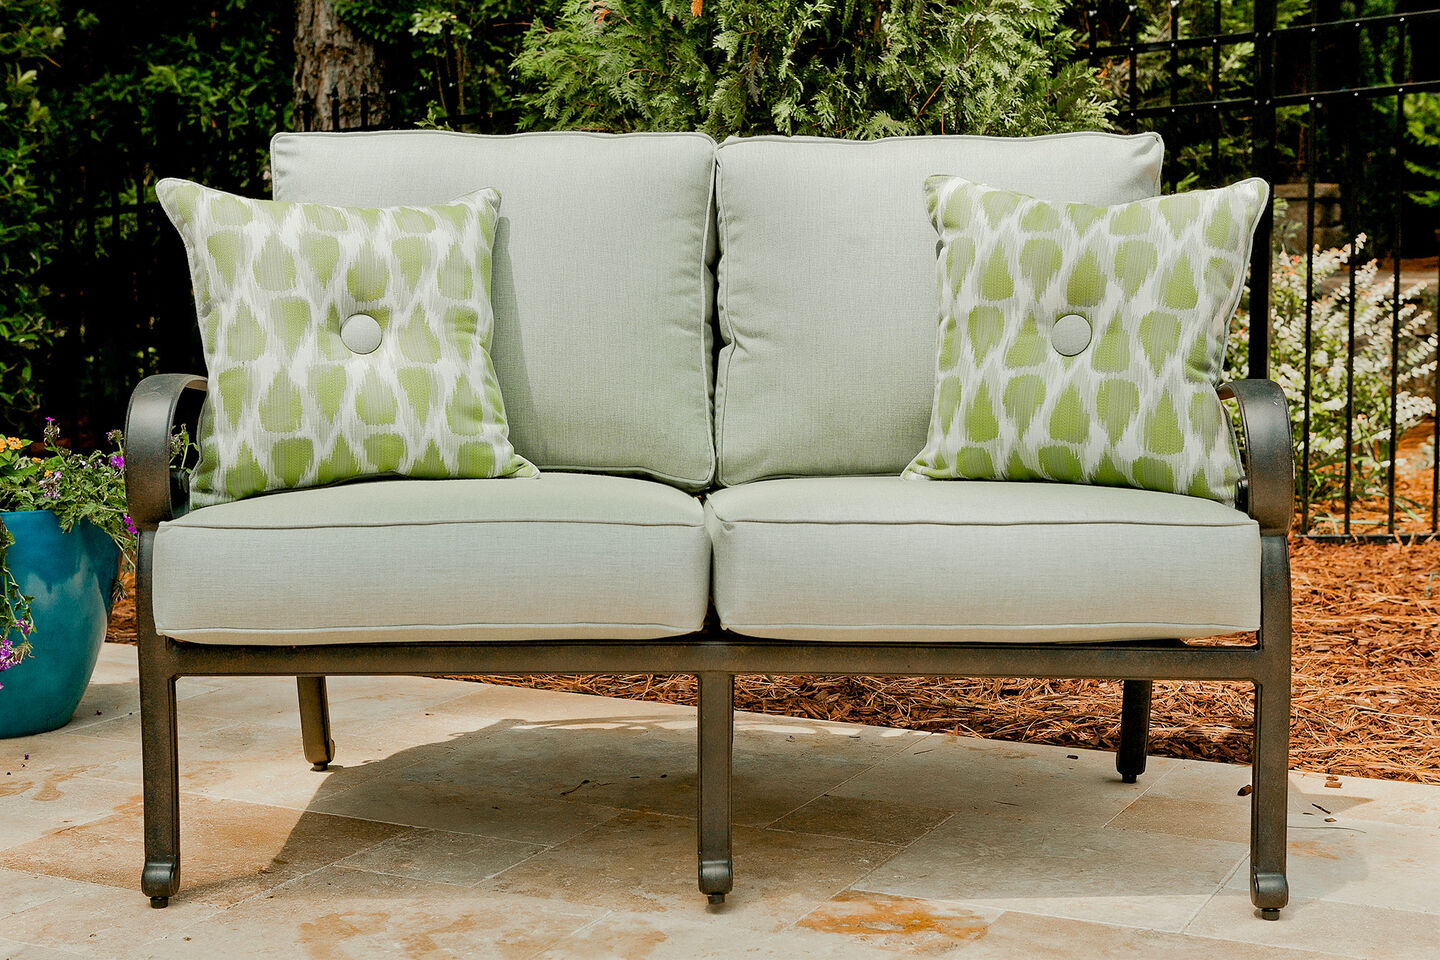 Durable gray and green outdoor cushions & pillows on a loveseat